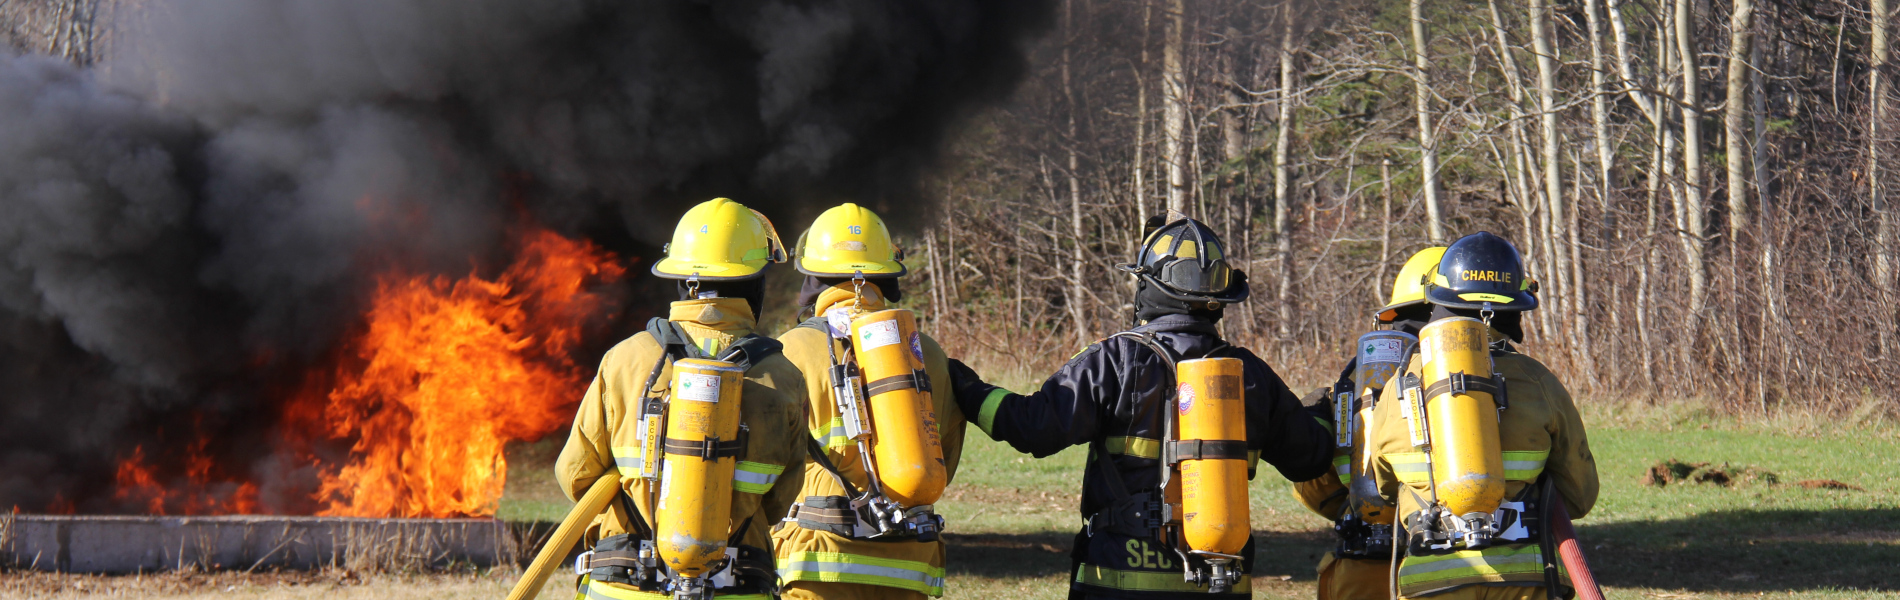 Professional Firefighter banner image